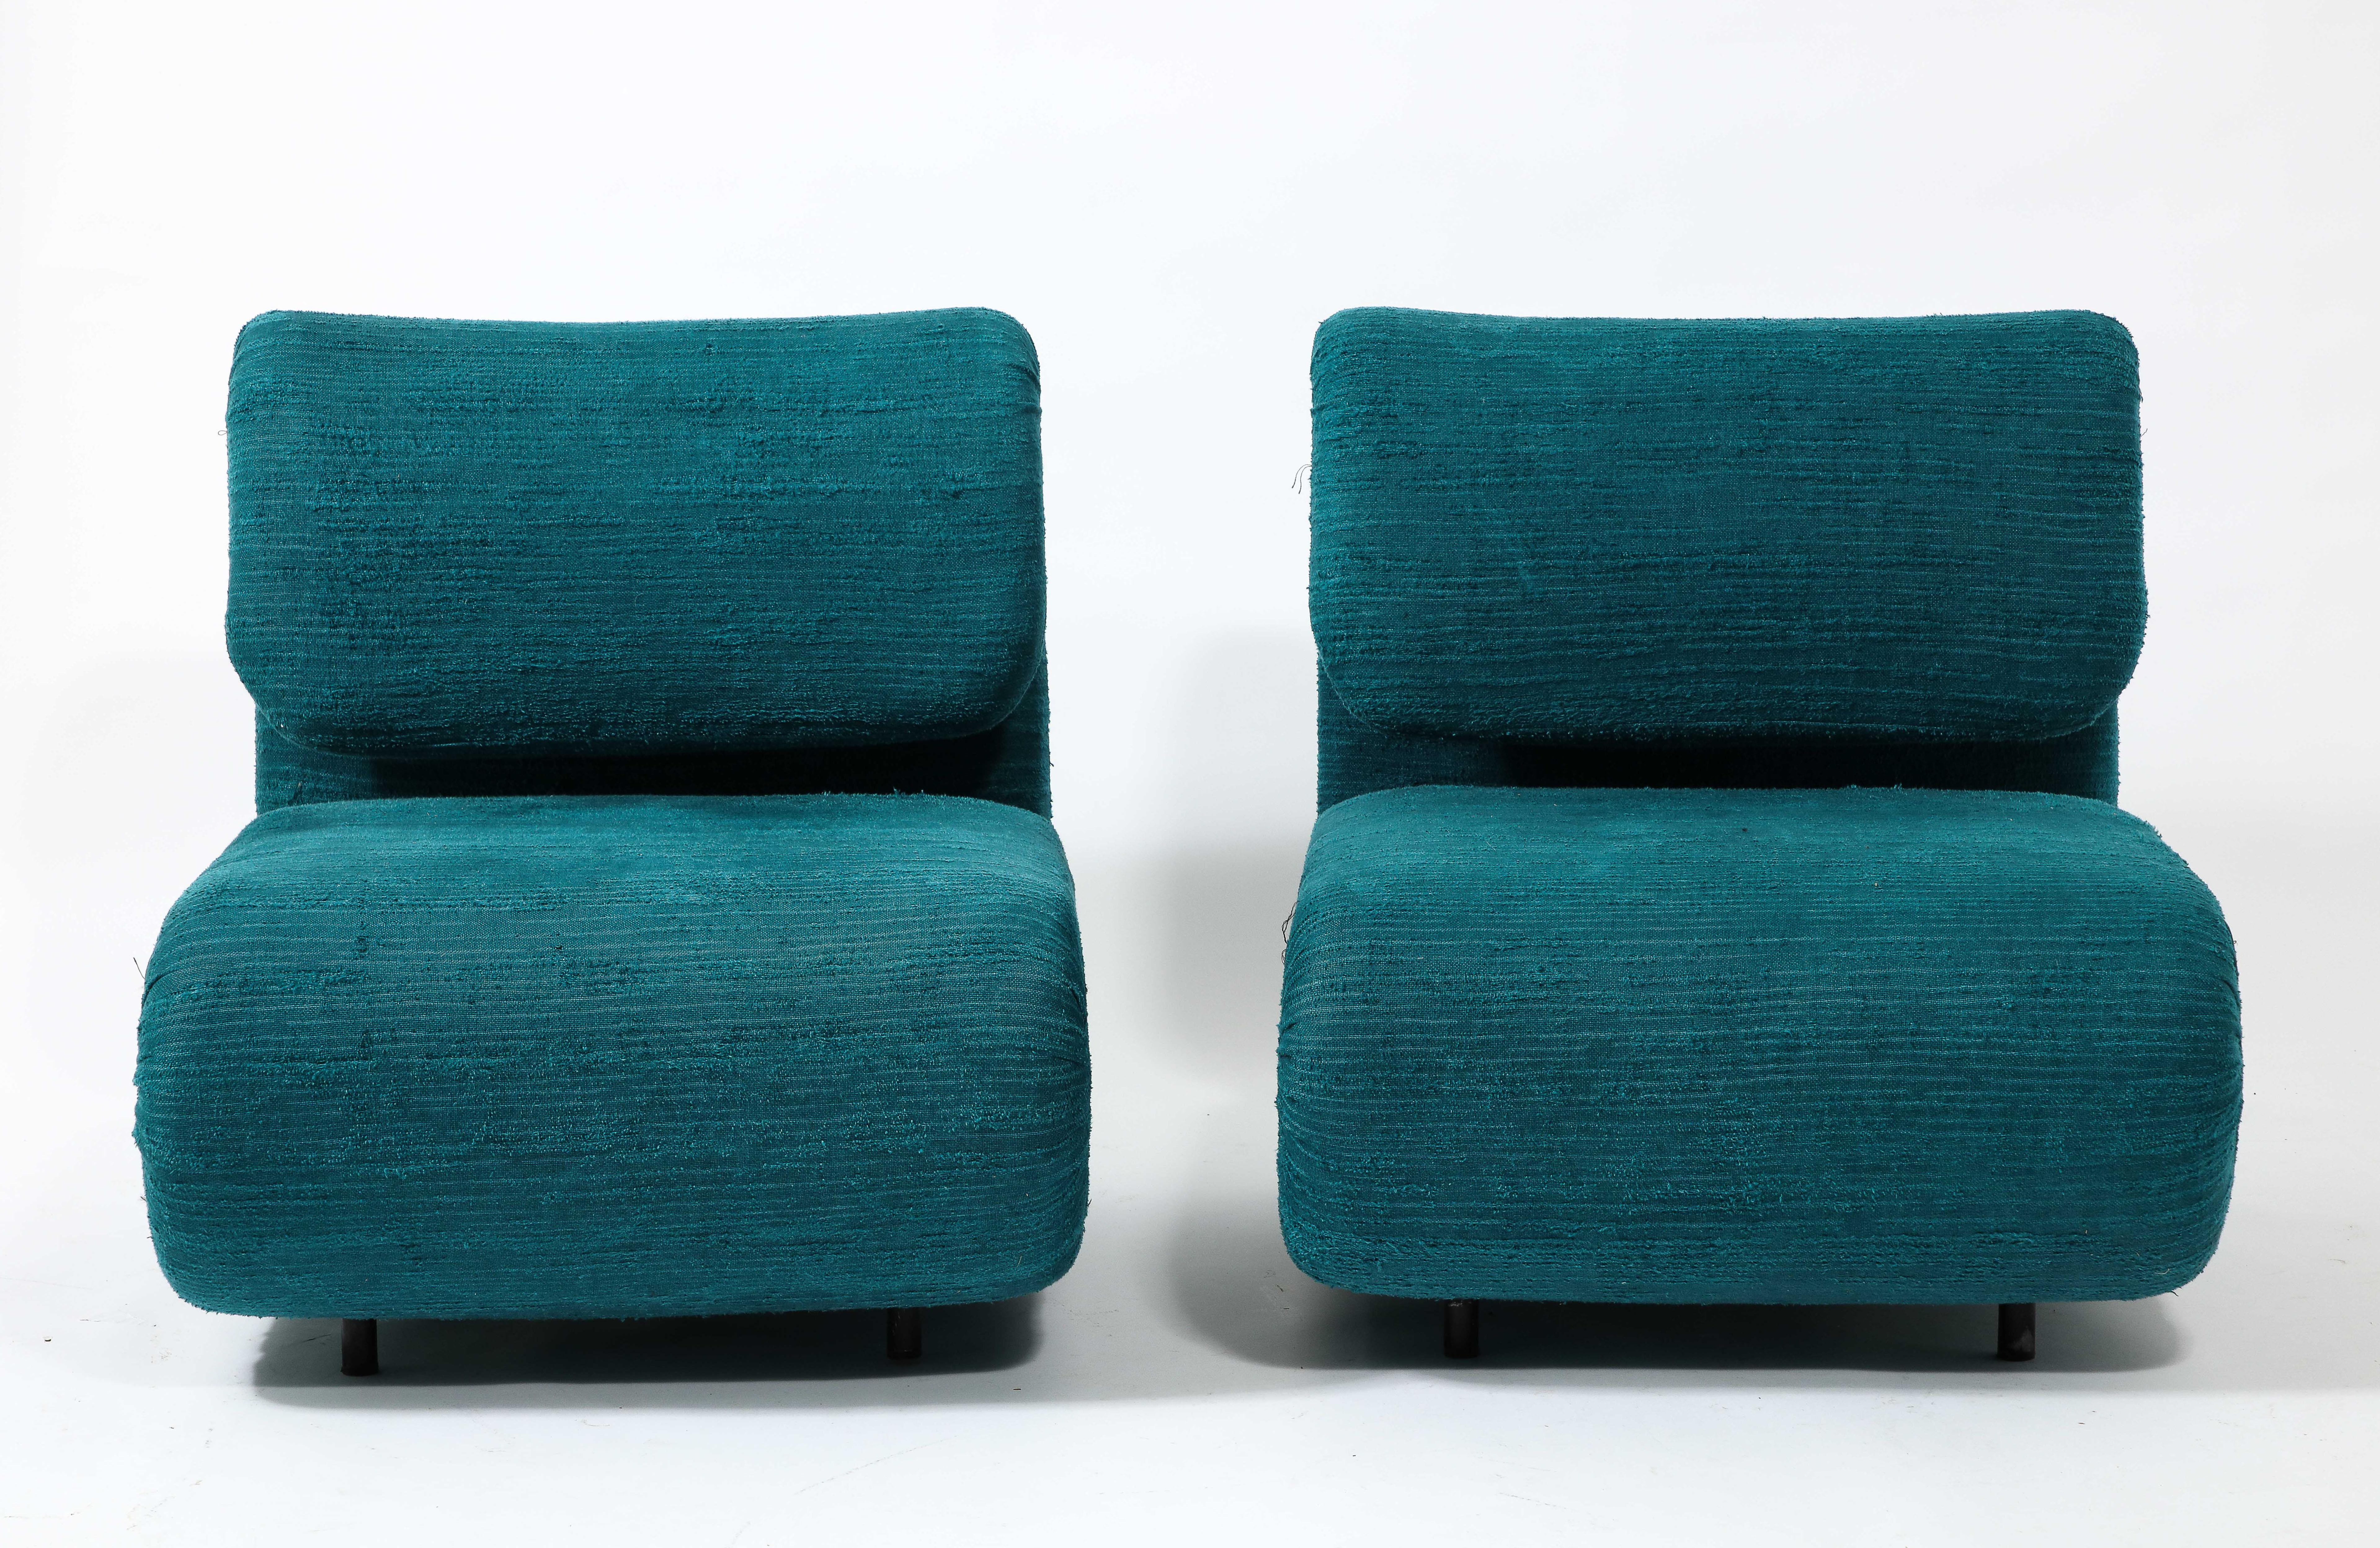 Etienne-Henri Martin Pair of 1500 Slipper Lounge Chairs in Teal, France 1960's For Sale 3